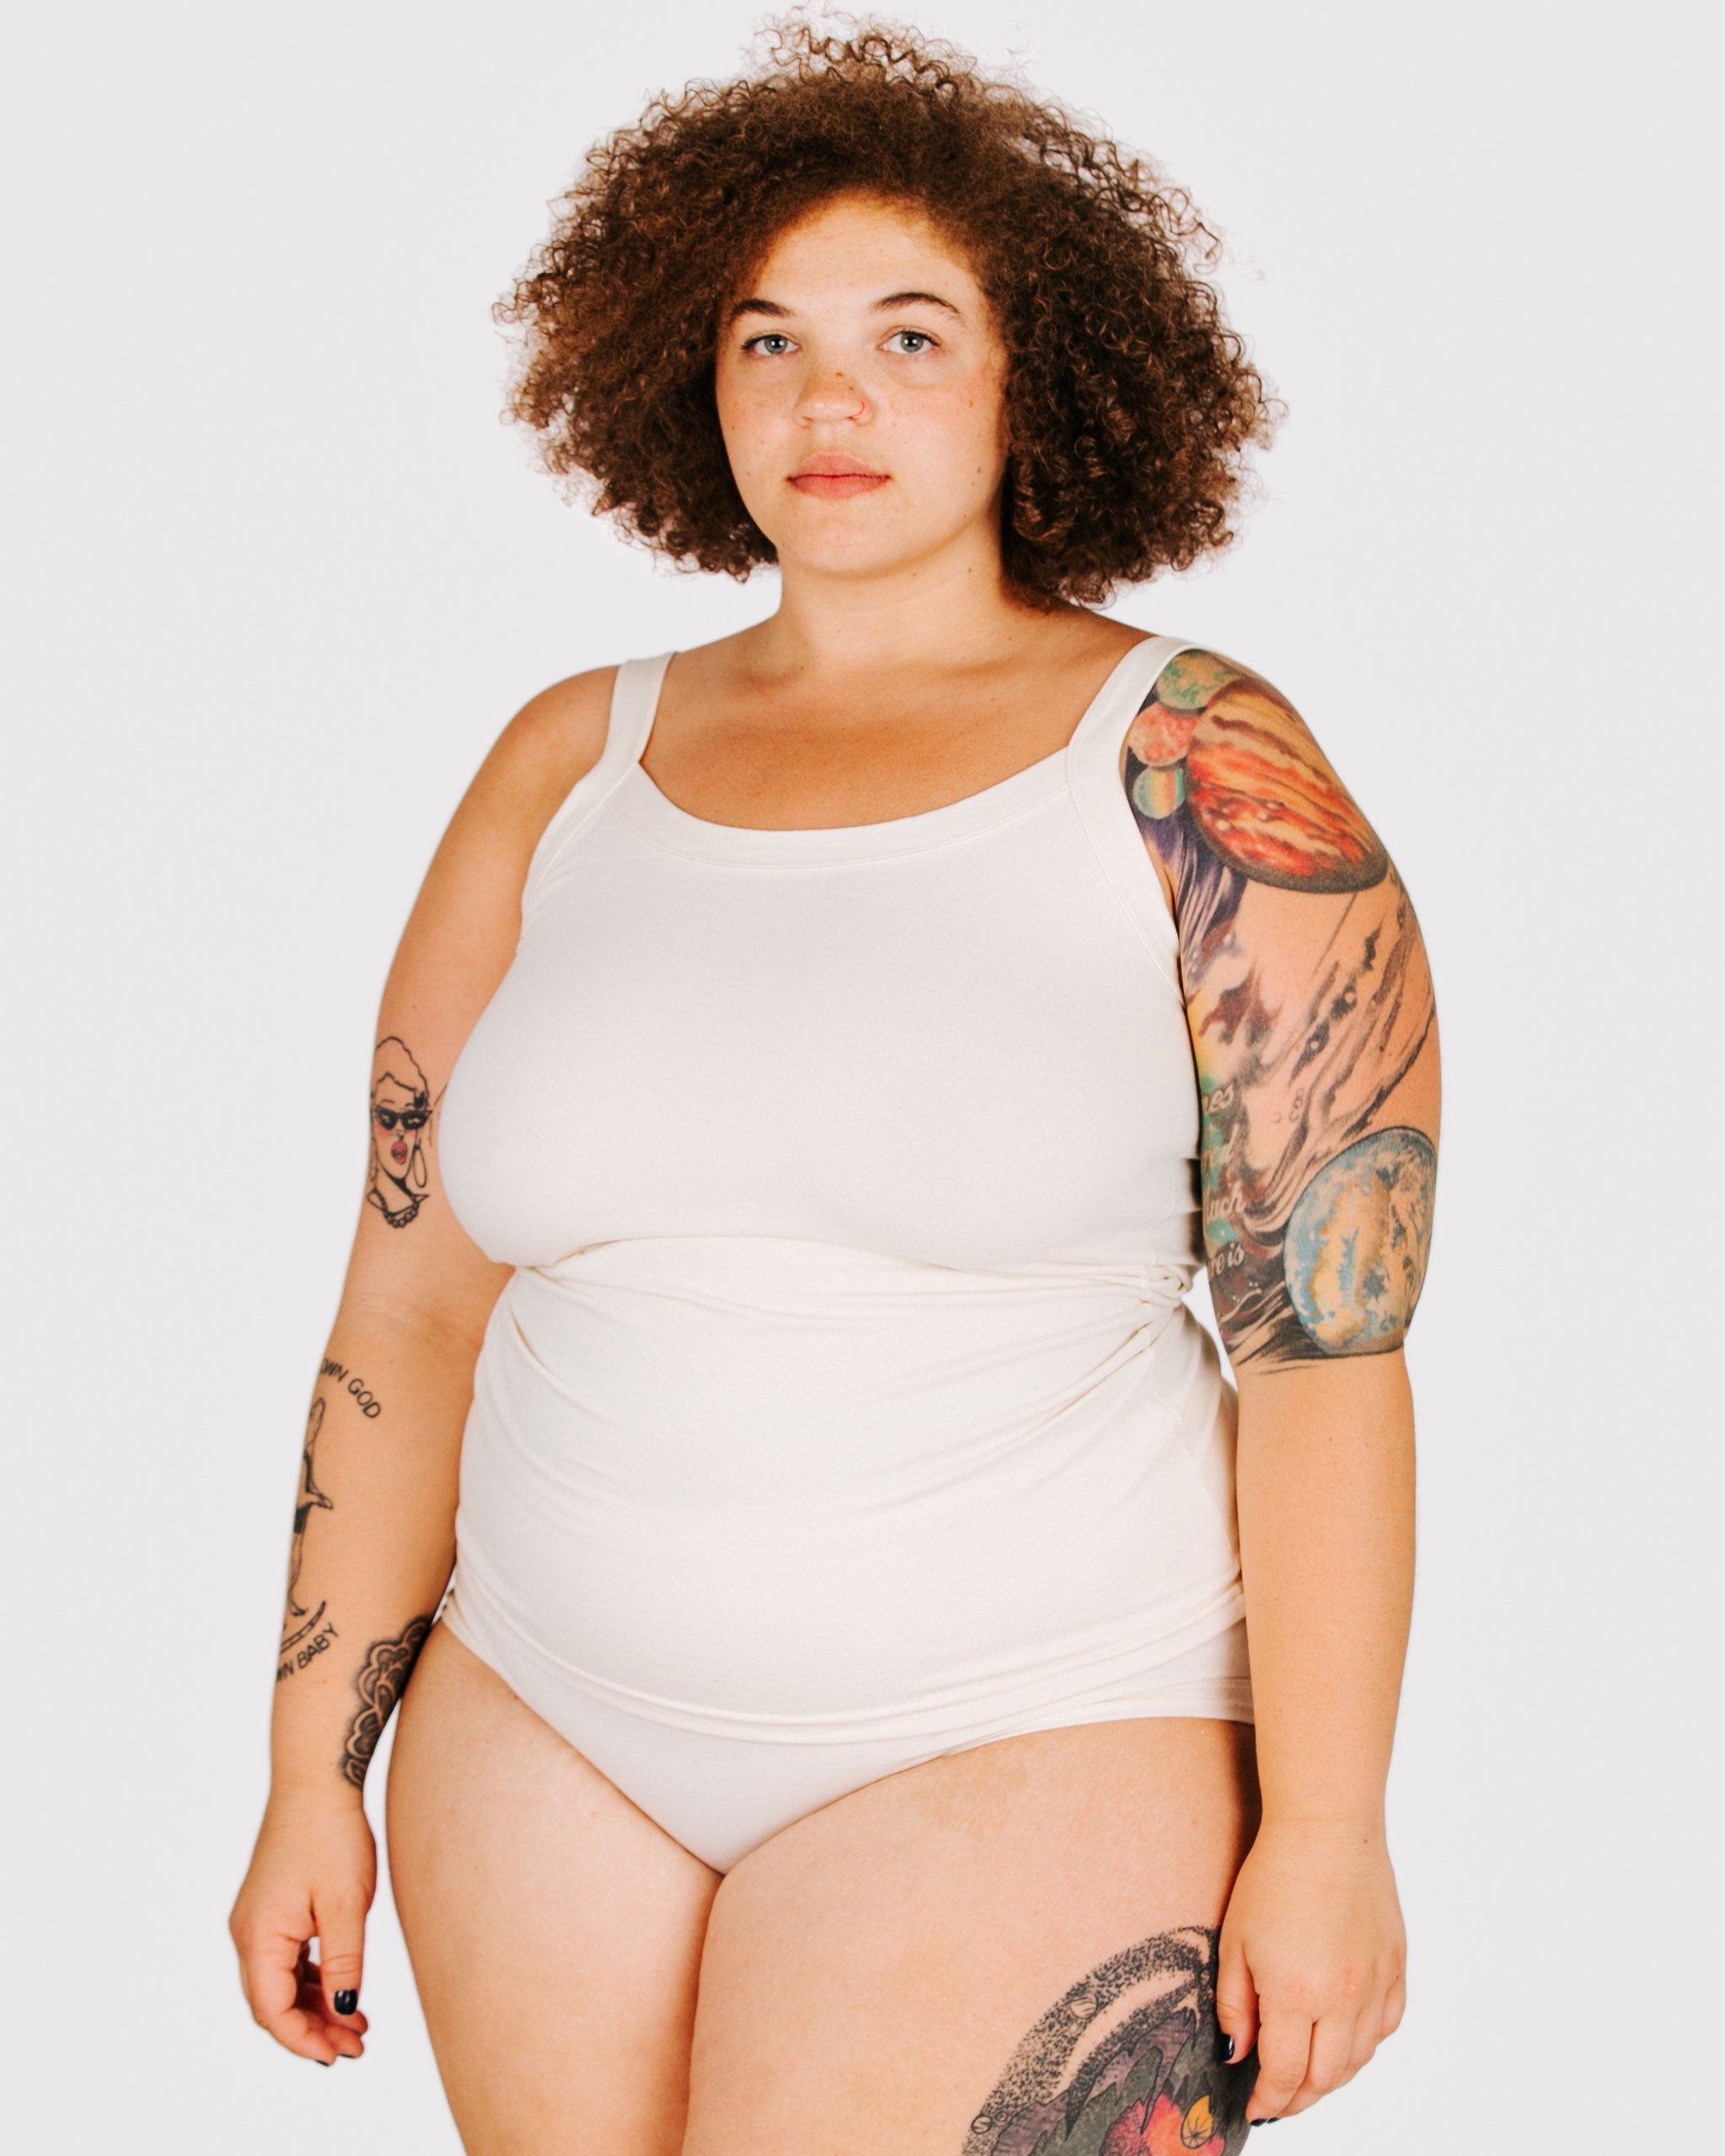 Fit photo from the front of Thunderpants organic cotton Camisole and Hipsters style underwear in off-white on a model.